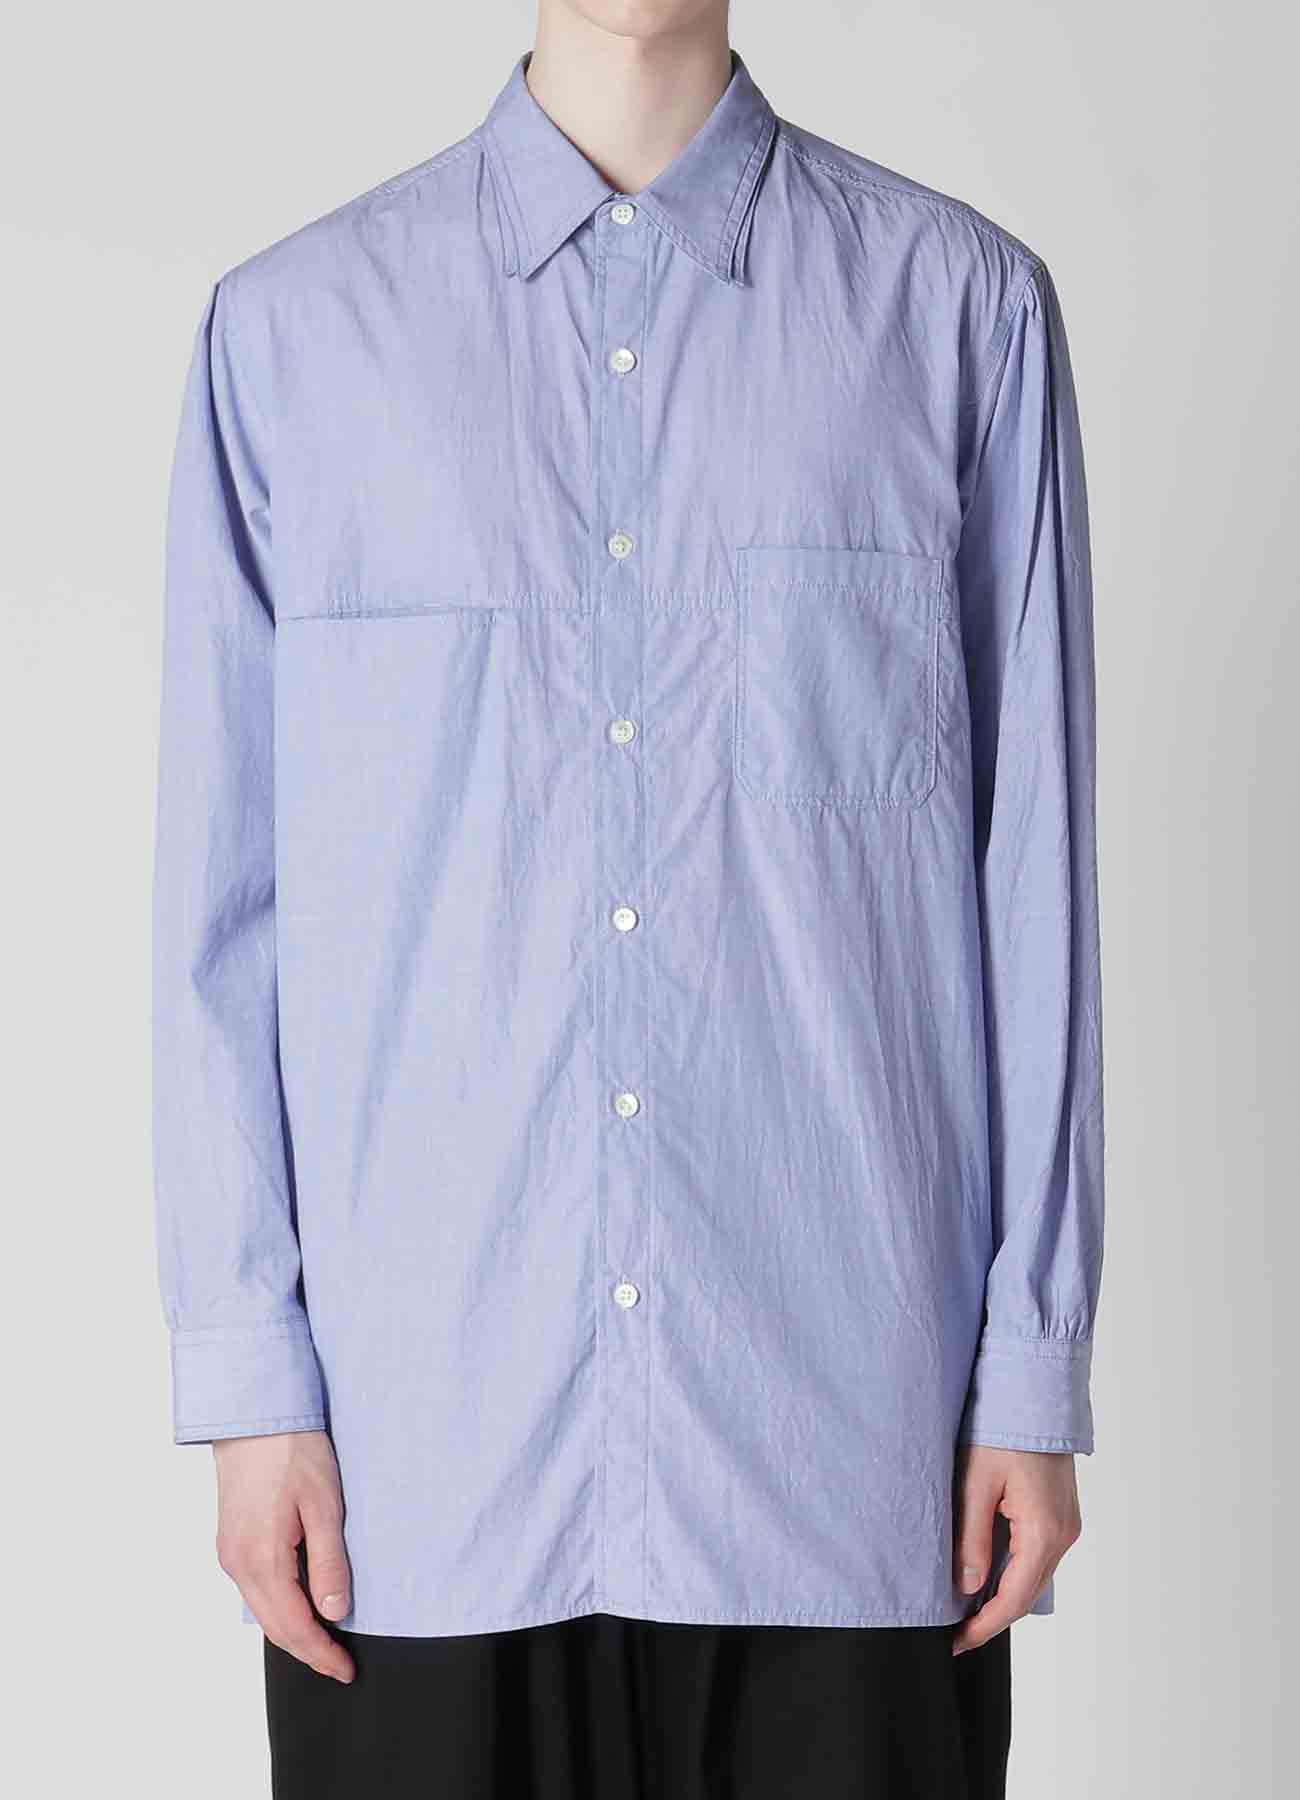 CHAIN STITCHED SHIRT WITH  DOUBLE COLLAR